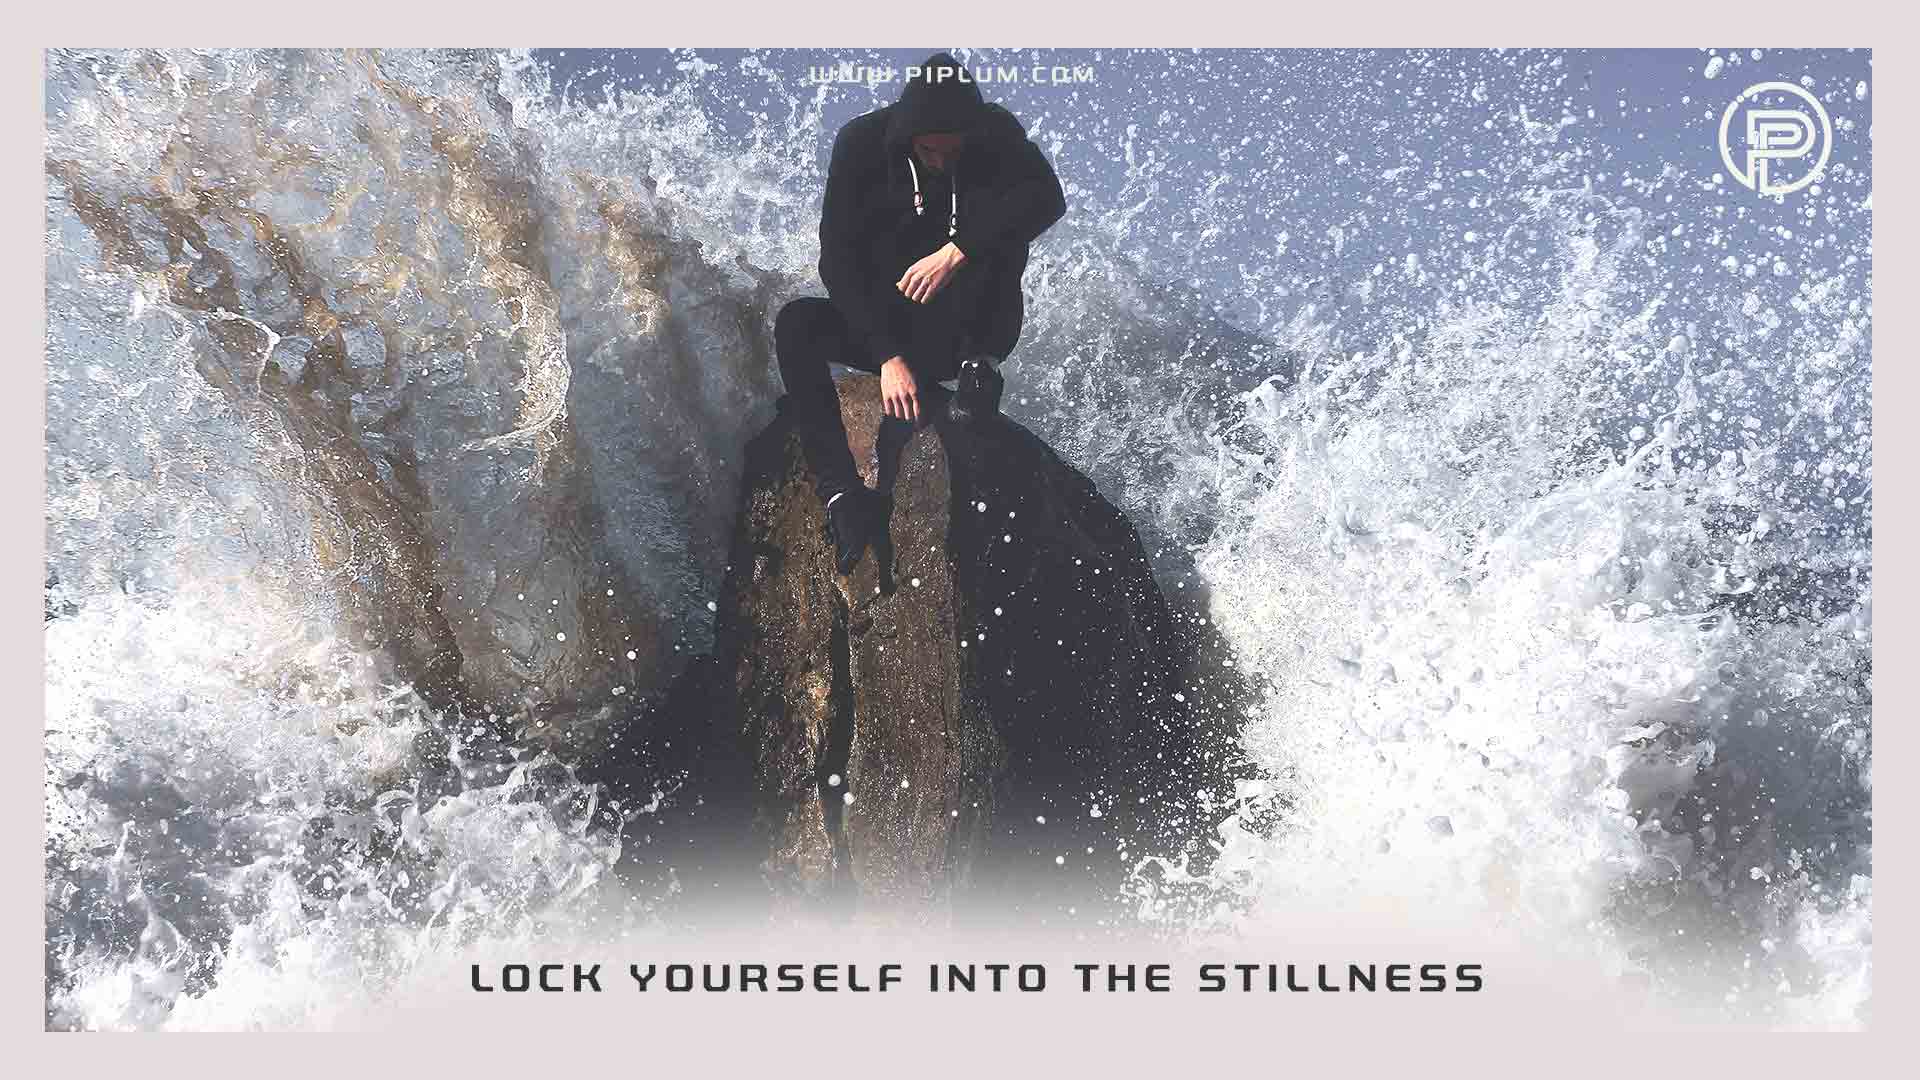 Lock-yourself-into-the-stillness-Inspirational-recession-quote 